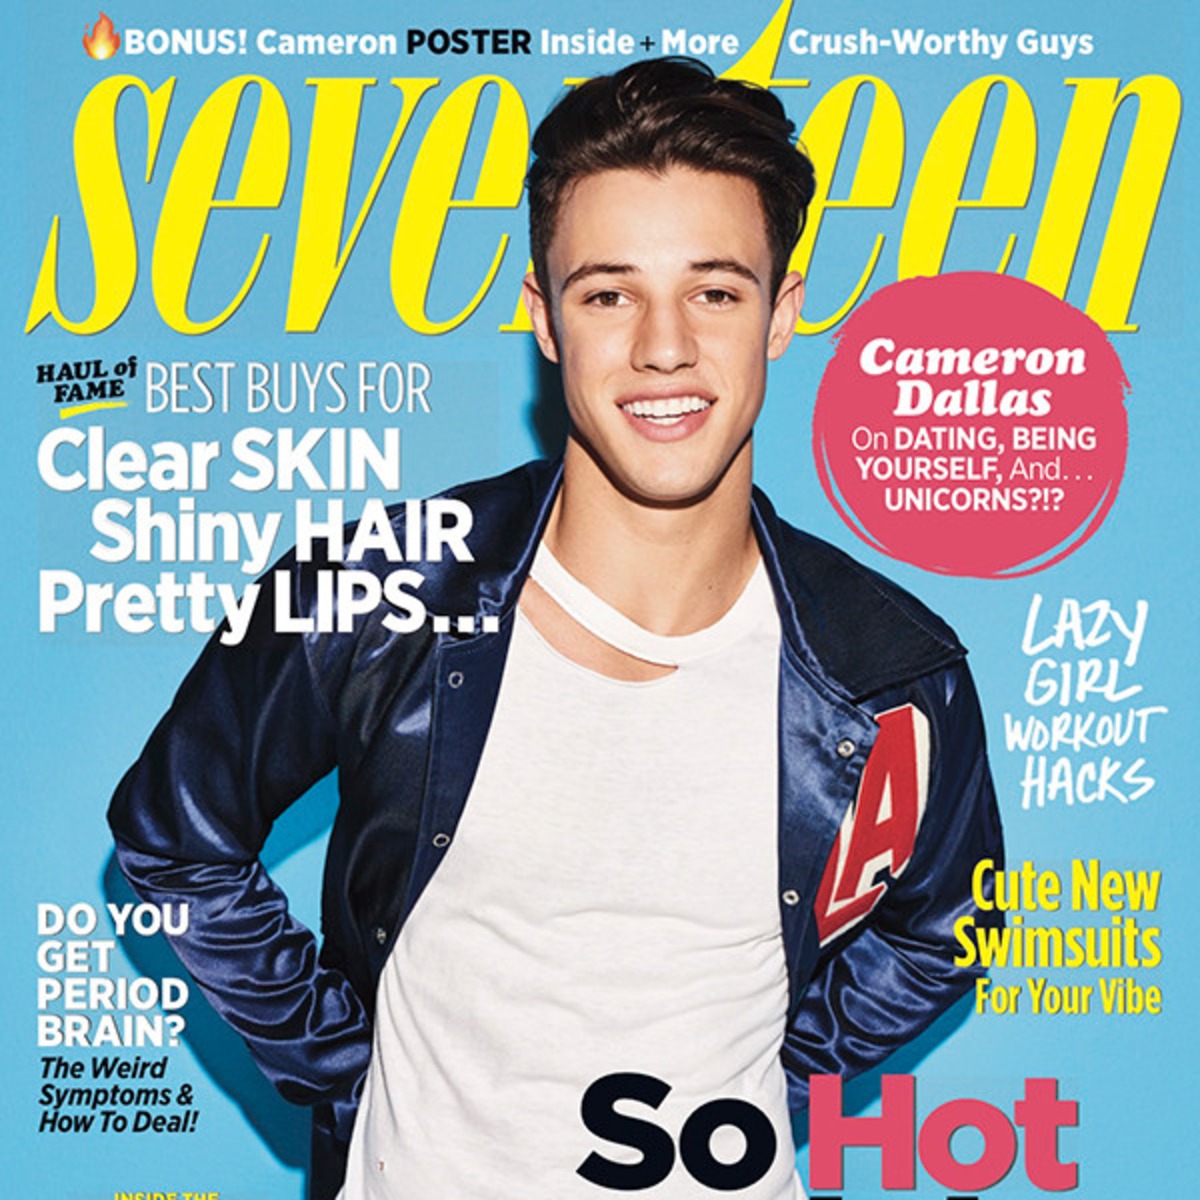 Cameron Dallas Dishes On His Dream Girl And Family Plans - E! Online